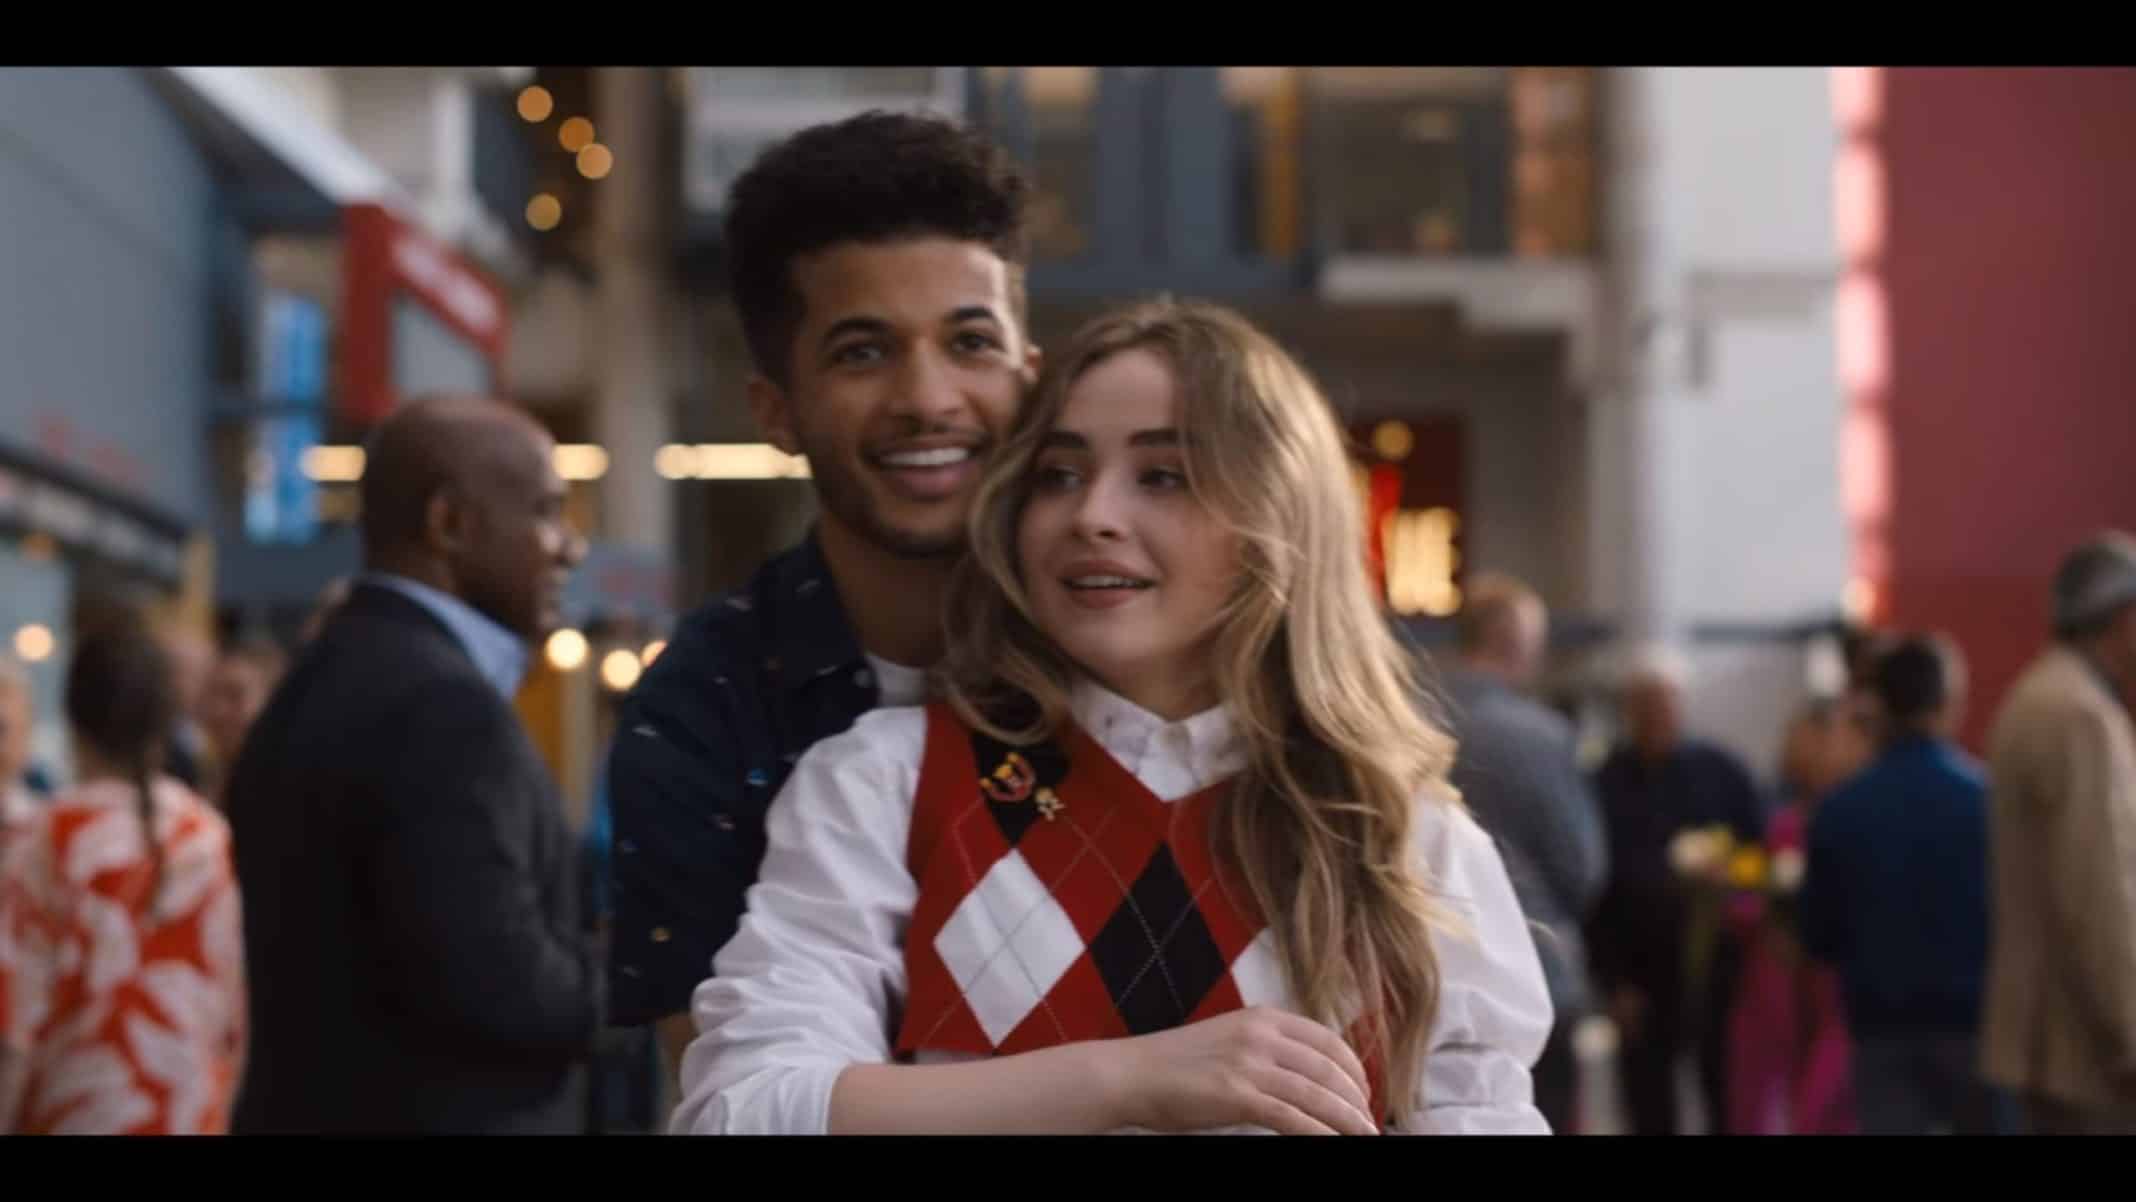 Jake (Jordan Fisher) and Quinn (Sabrina Carpenter) holding one another.